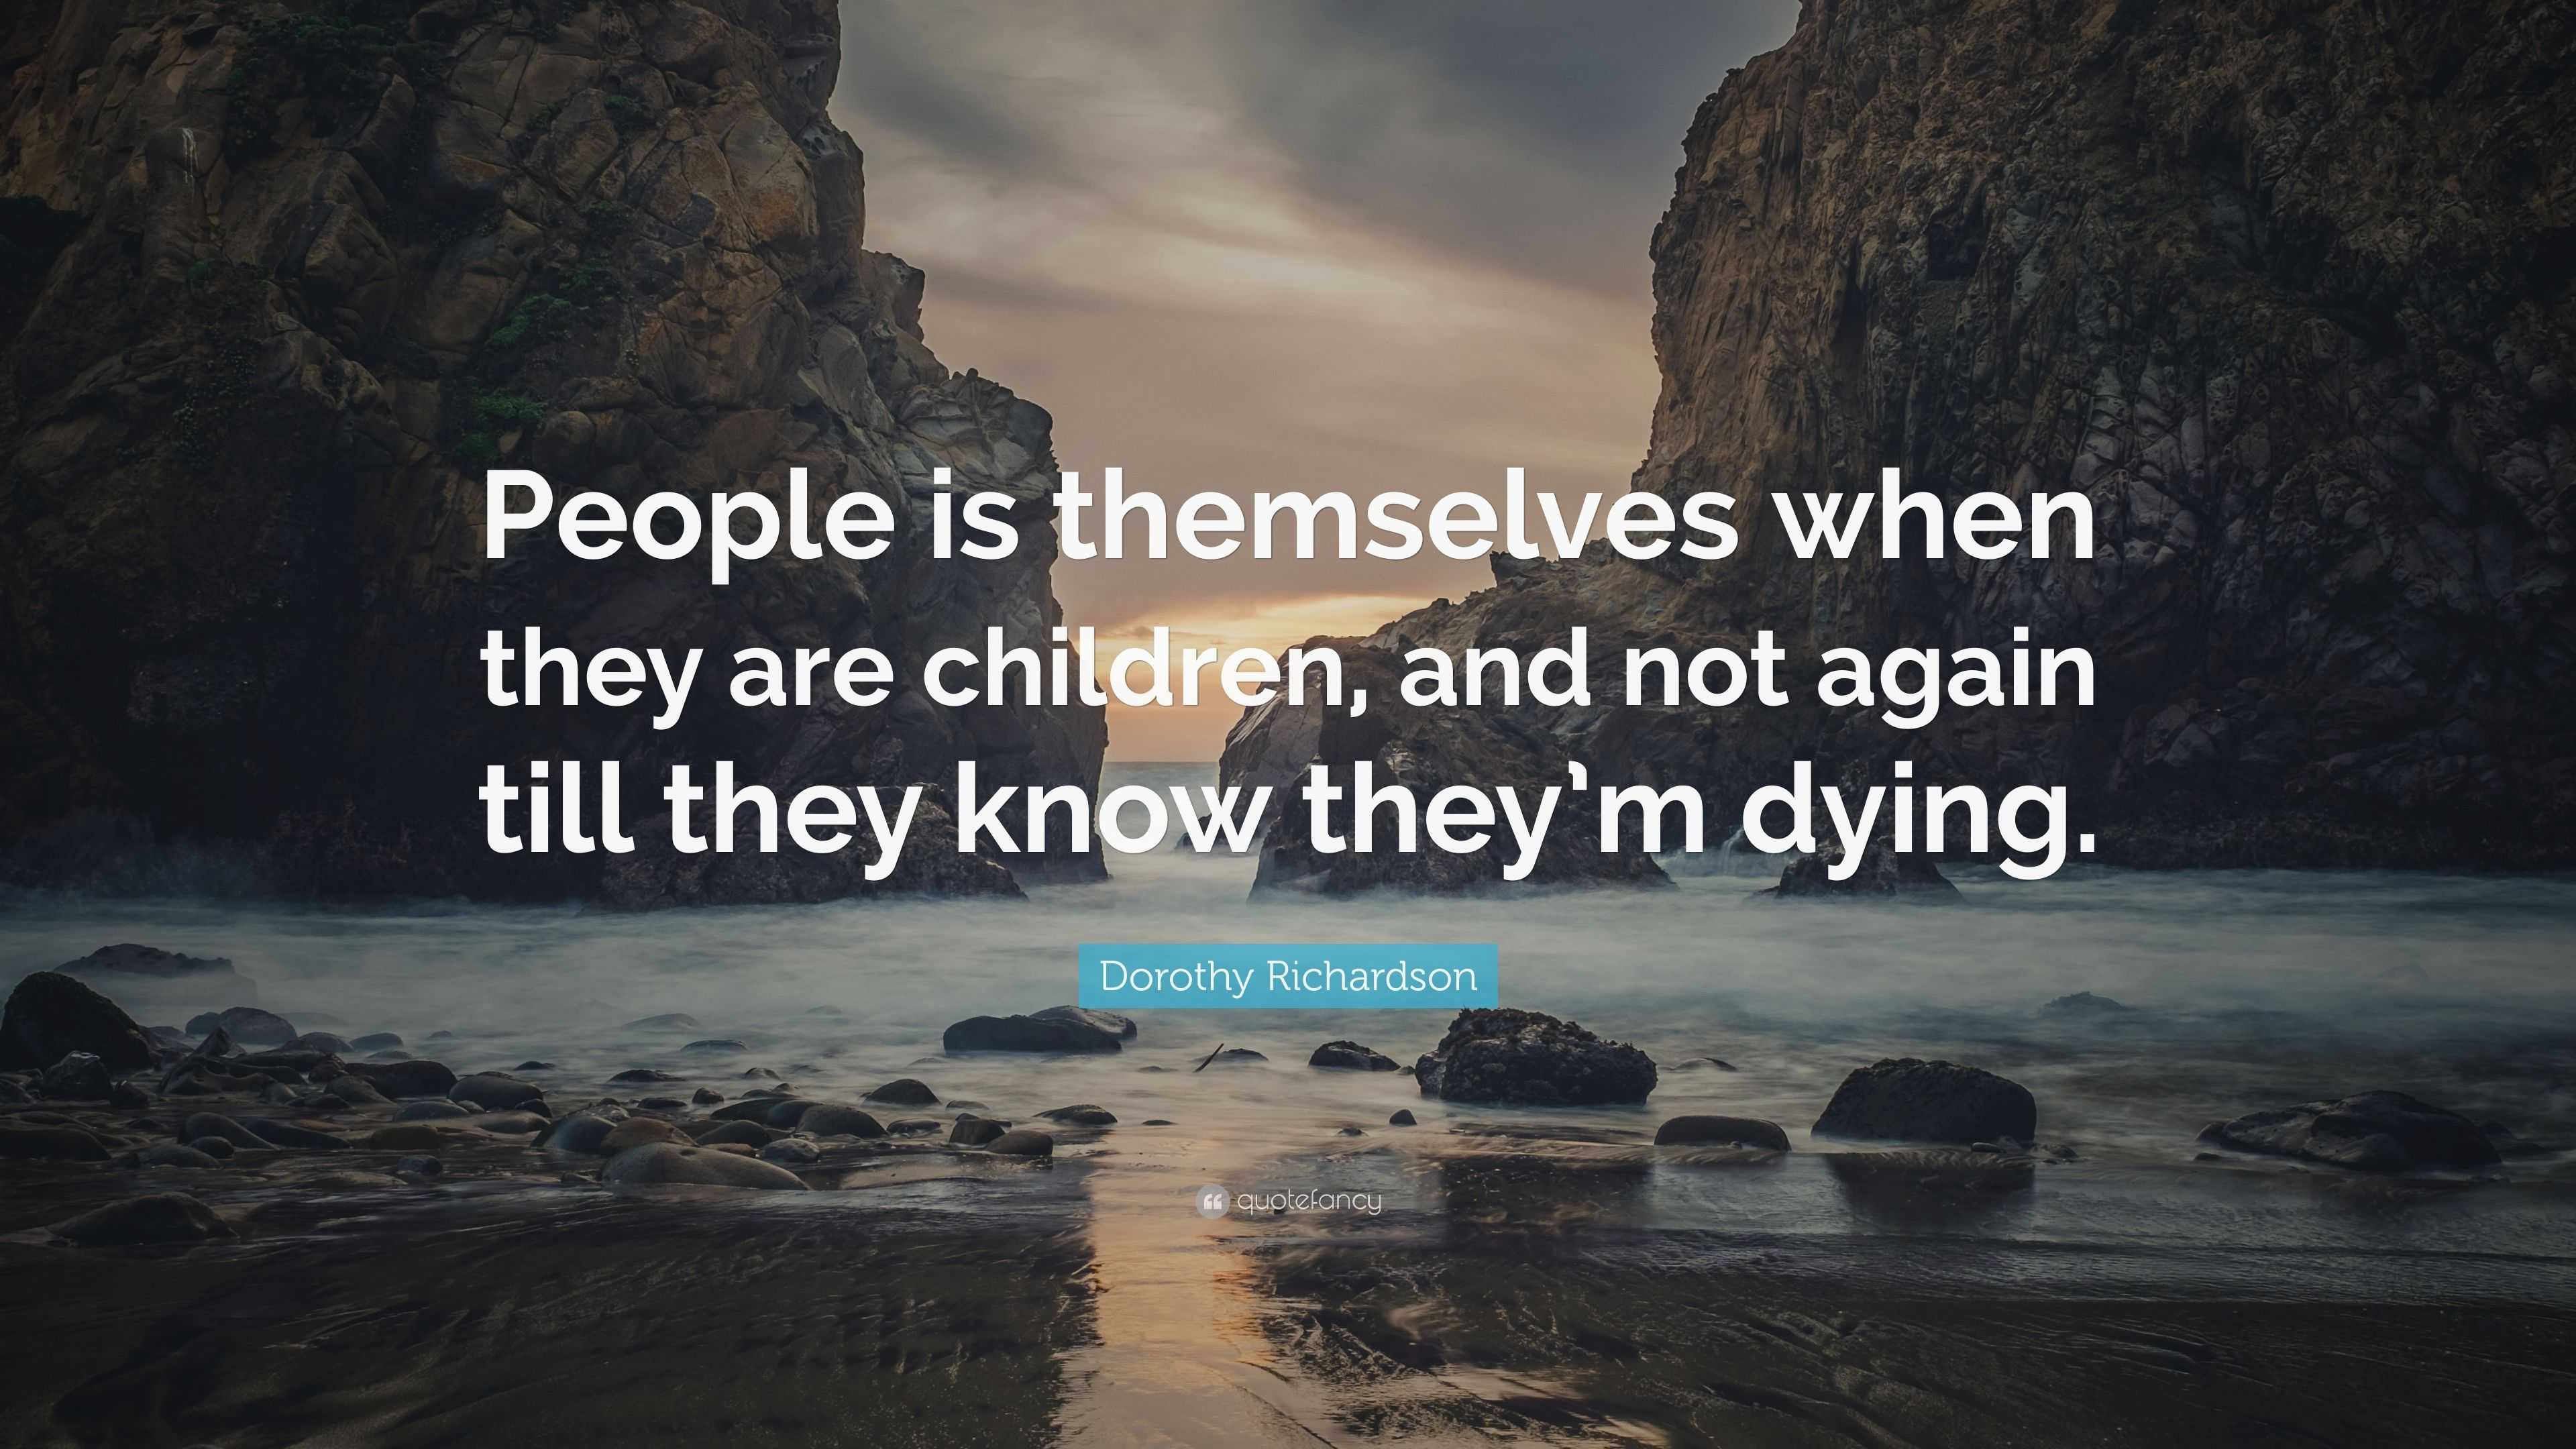 Dorothy Richardson Quote: “People is themselves when they are children ...